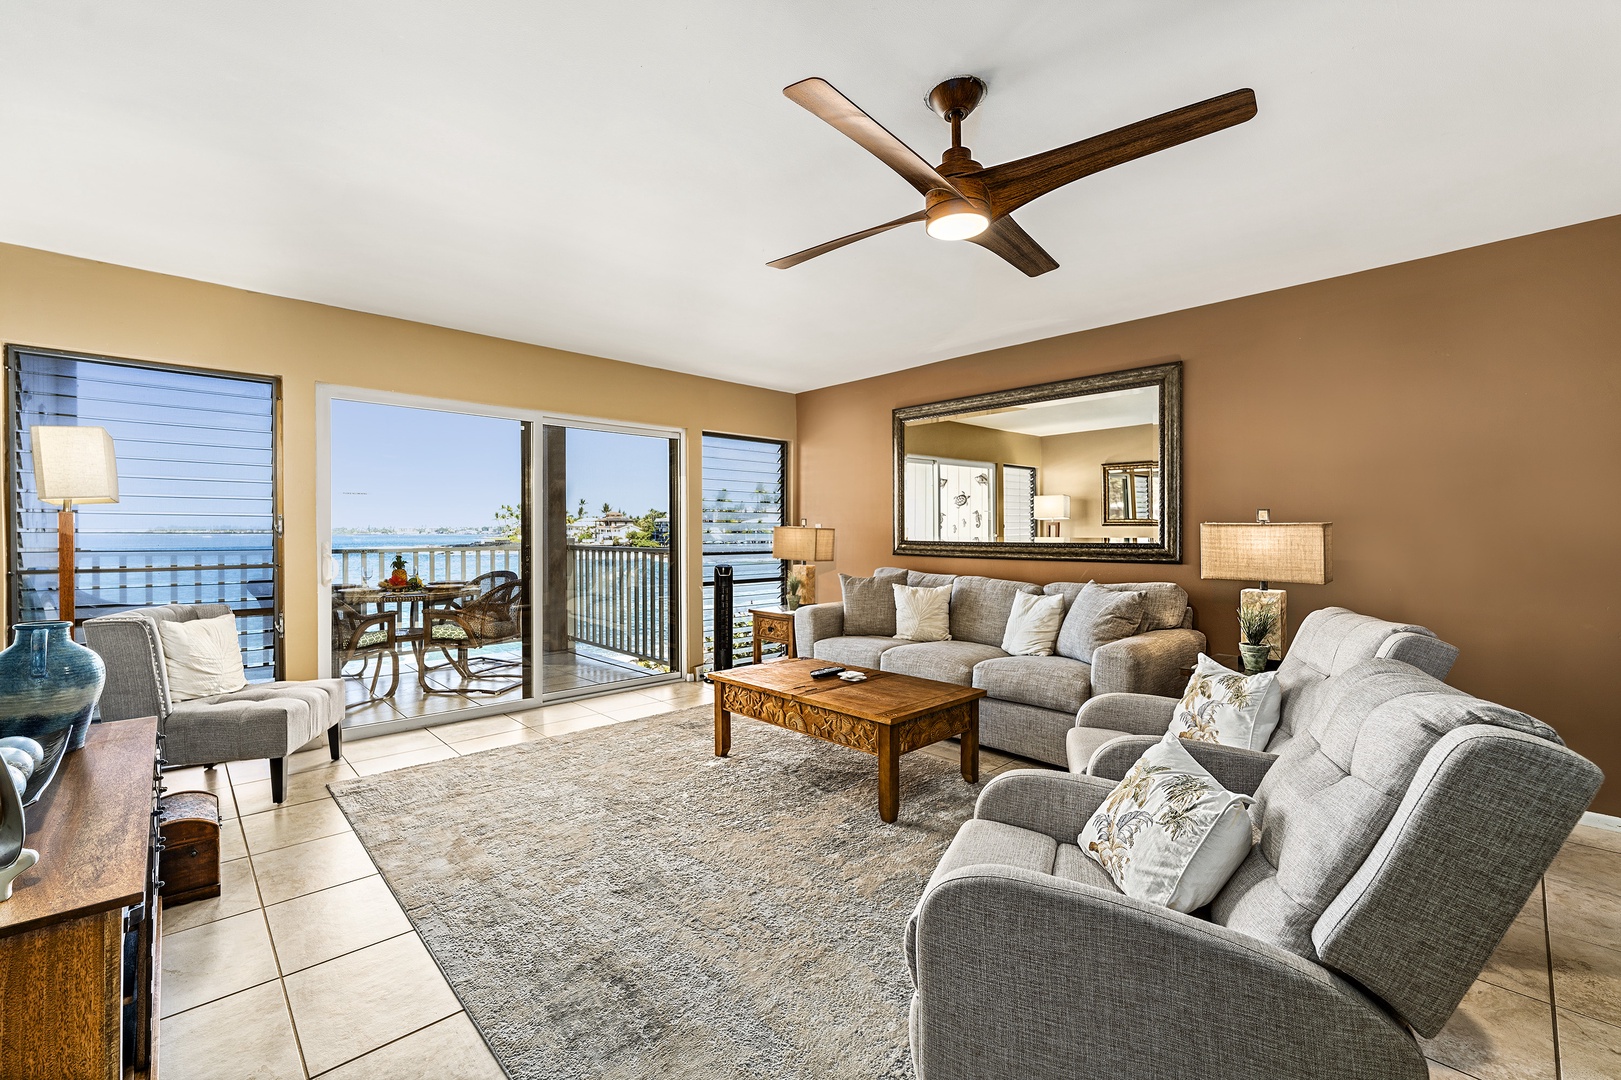 Kailua Kona Vacation Rentals, Sea Village 1105 - Upgraded and comfortably outfitted living room